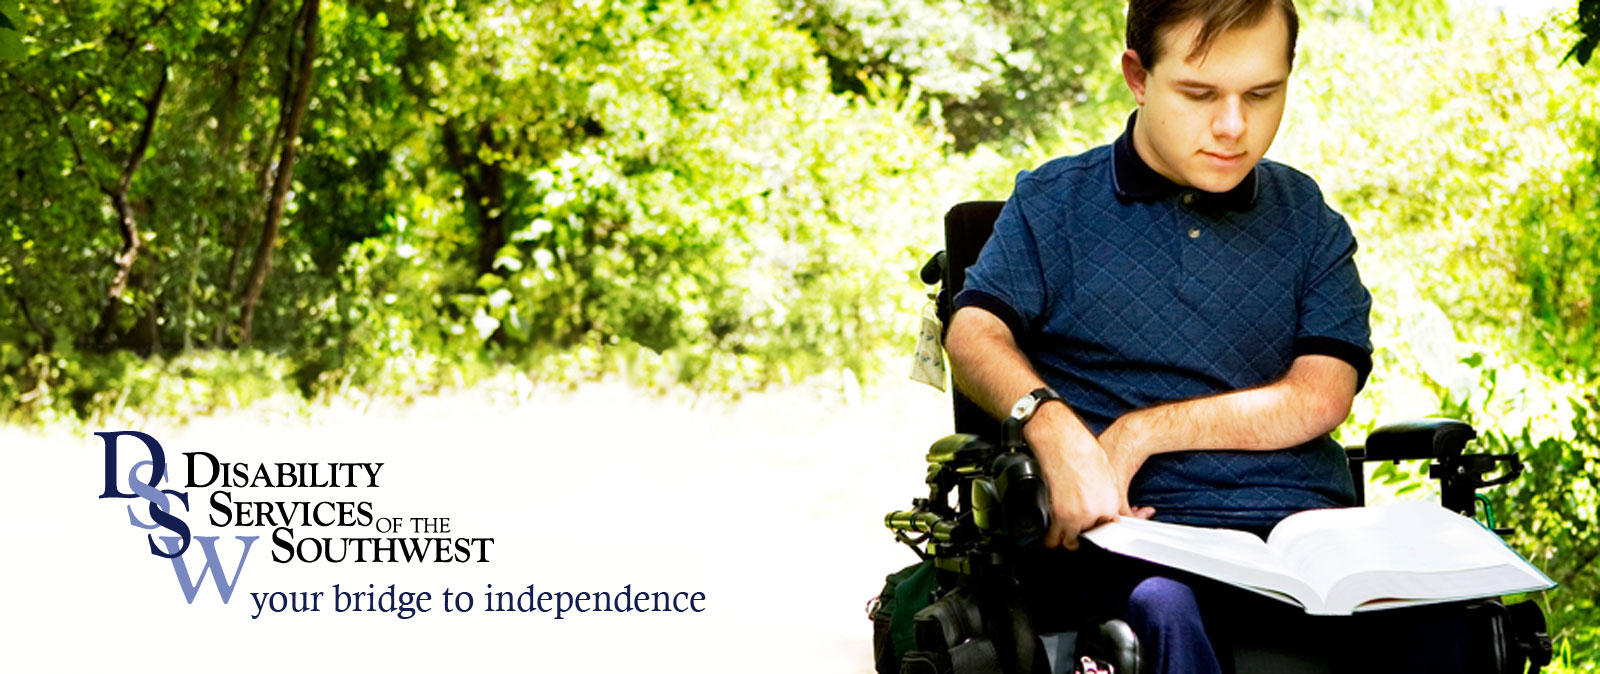 Disability Services of the Southwest. Your bridge to independence.